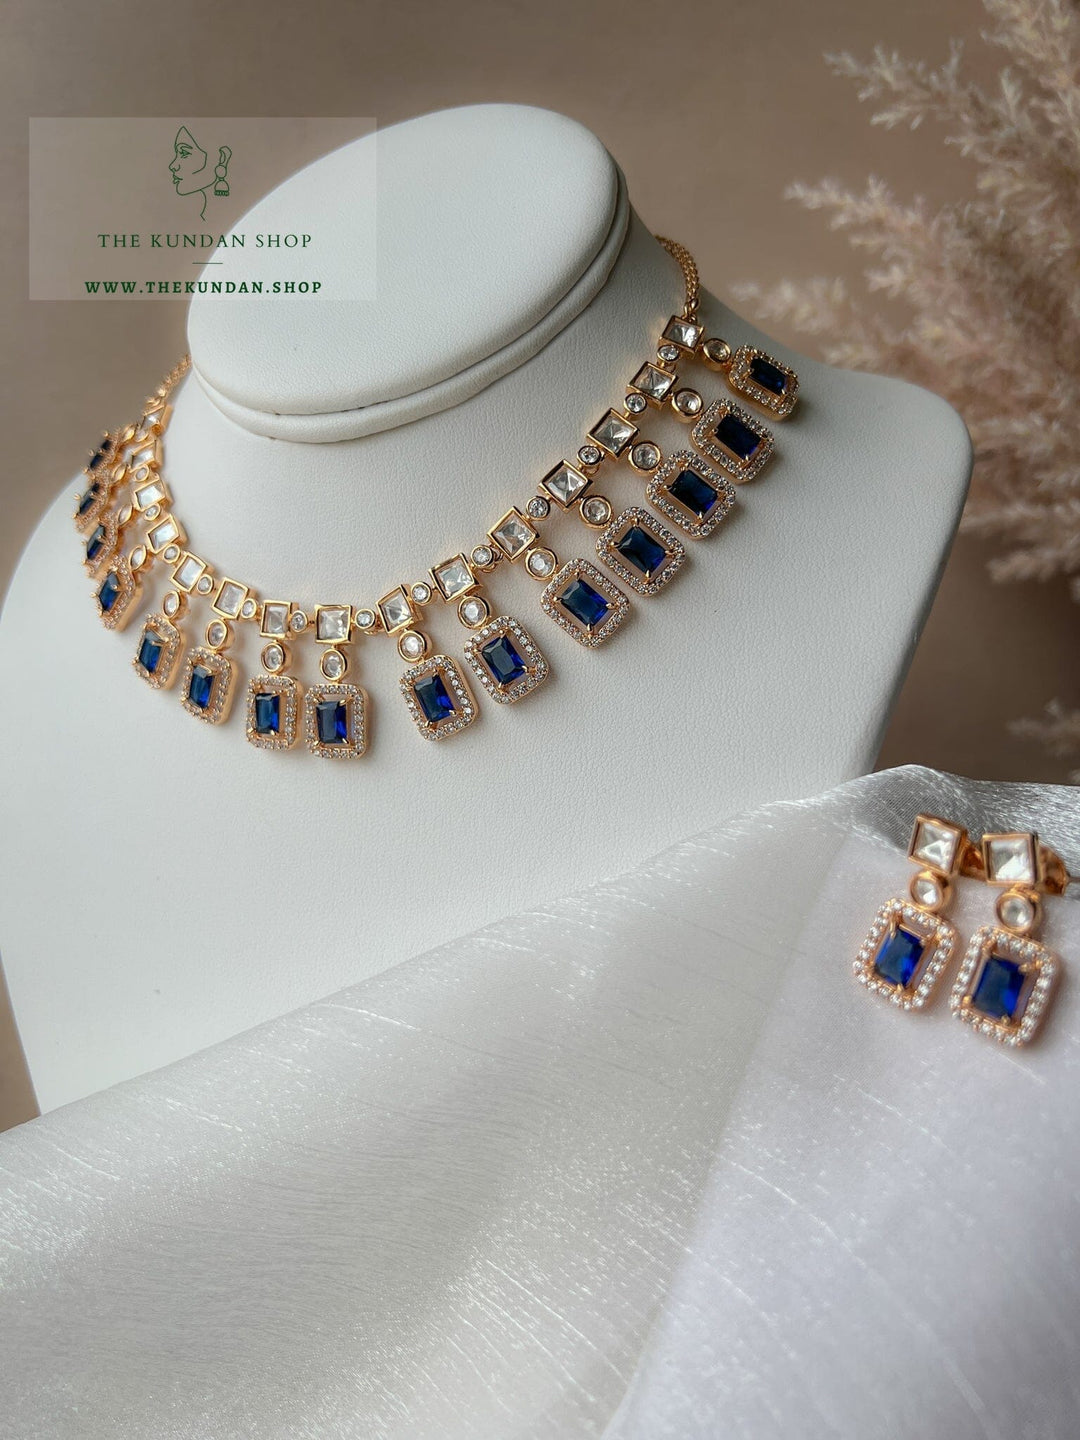 Rise in Midnight Blue Necklace Sets THE KUNDAN SHOP 